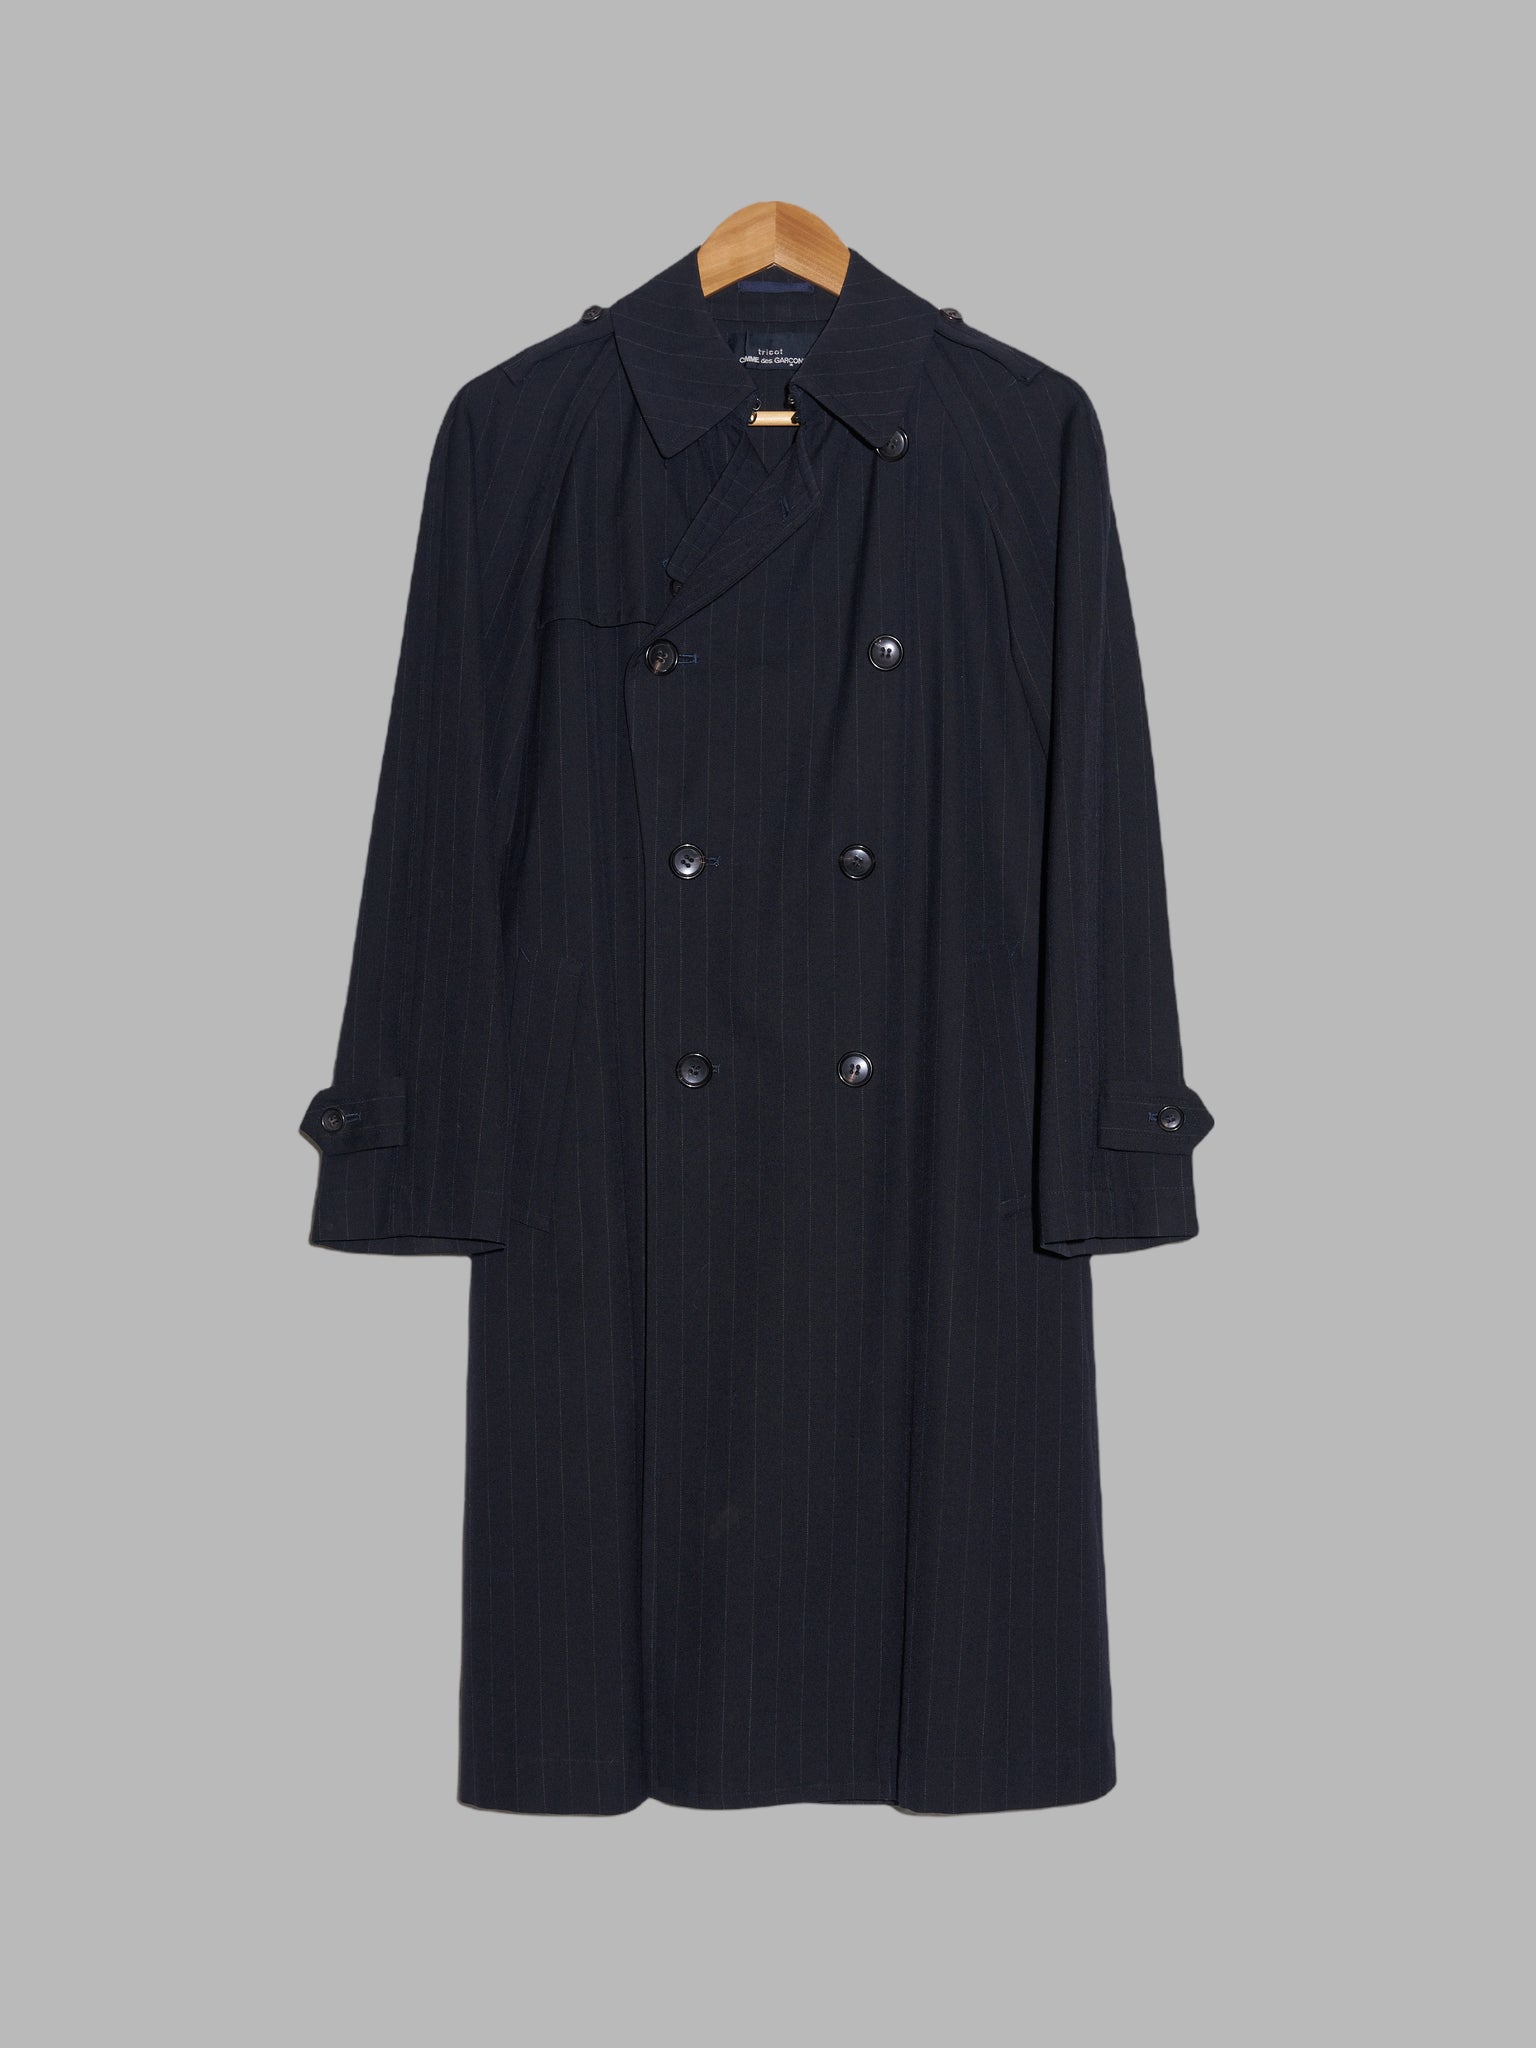 Tricot Comme des Garcons 1998 dark navy striped wool trench coat